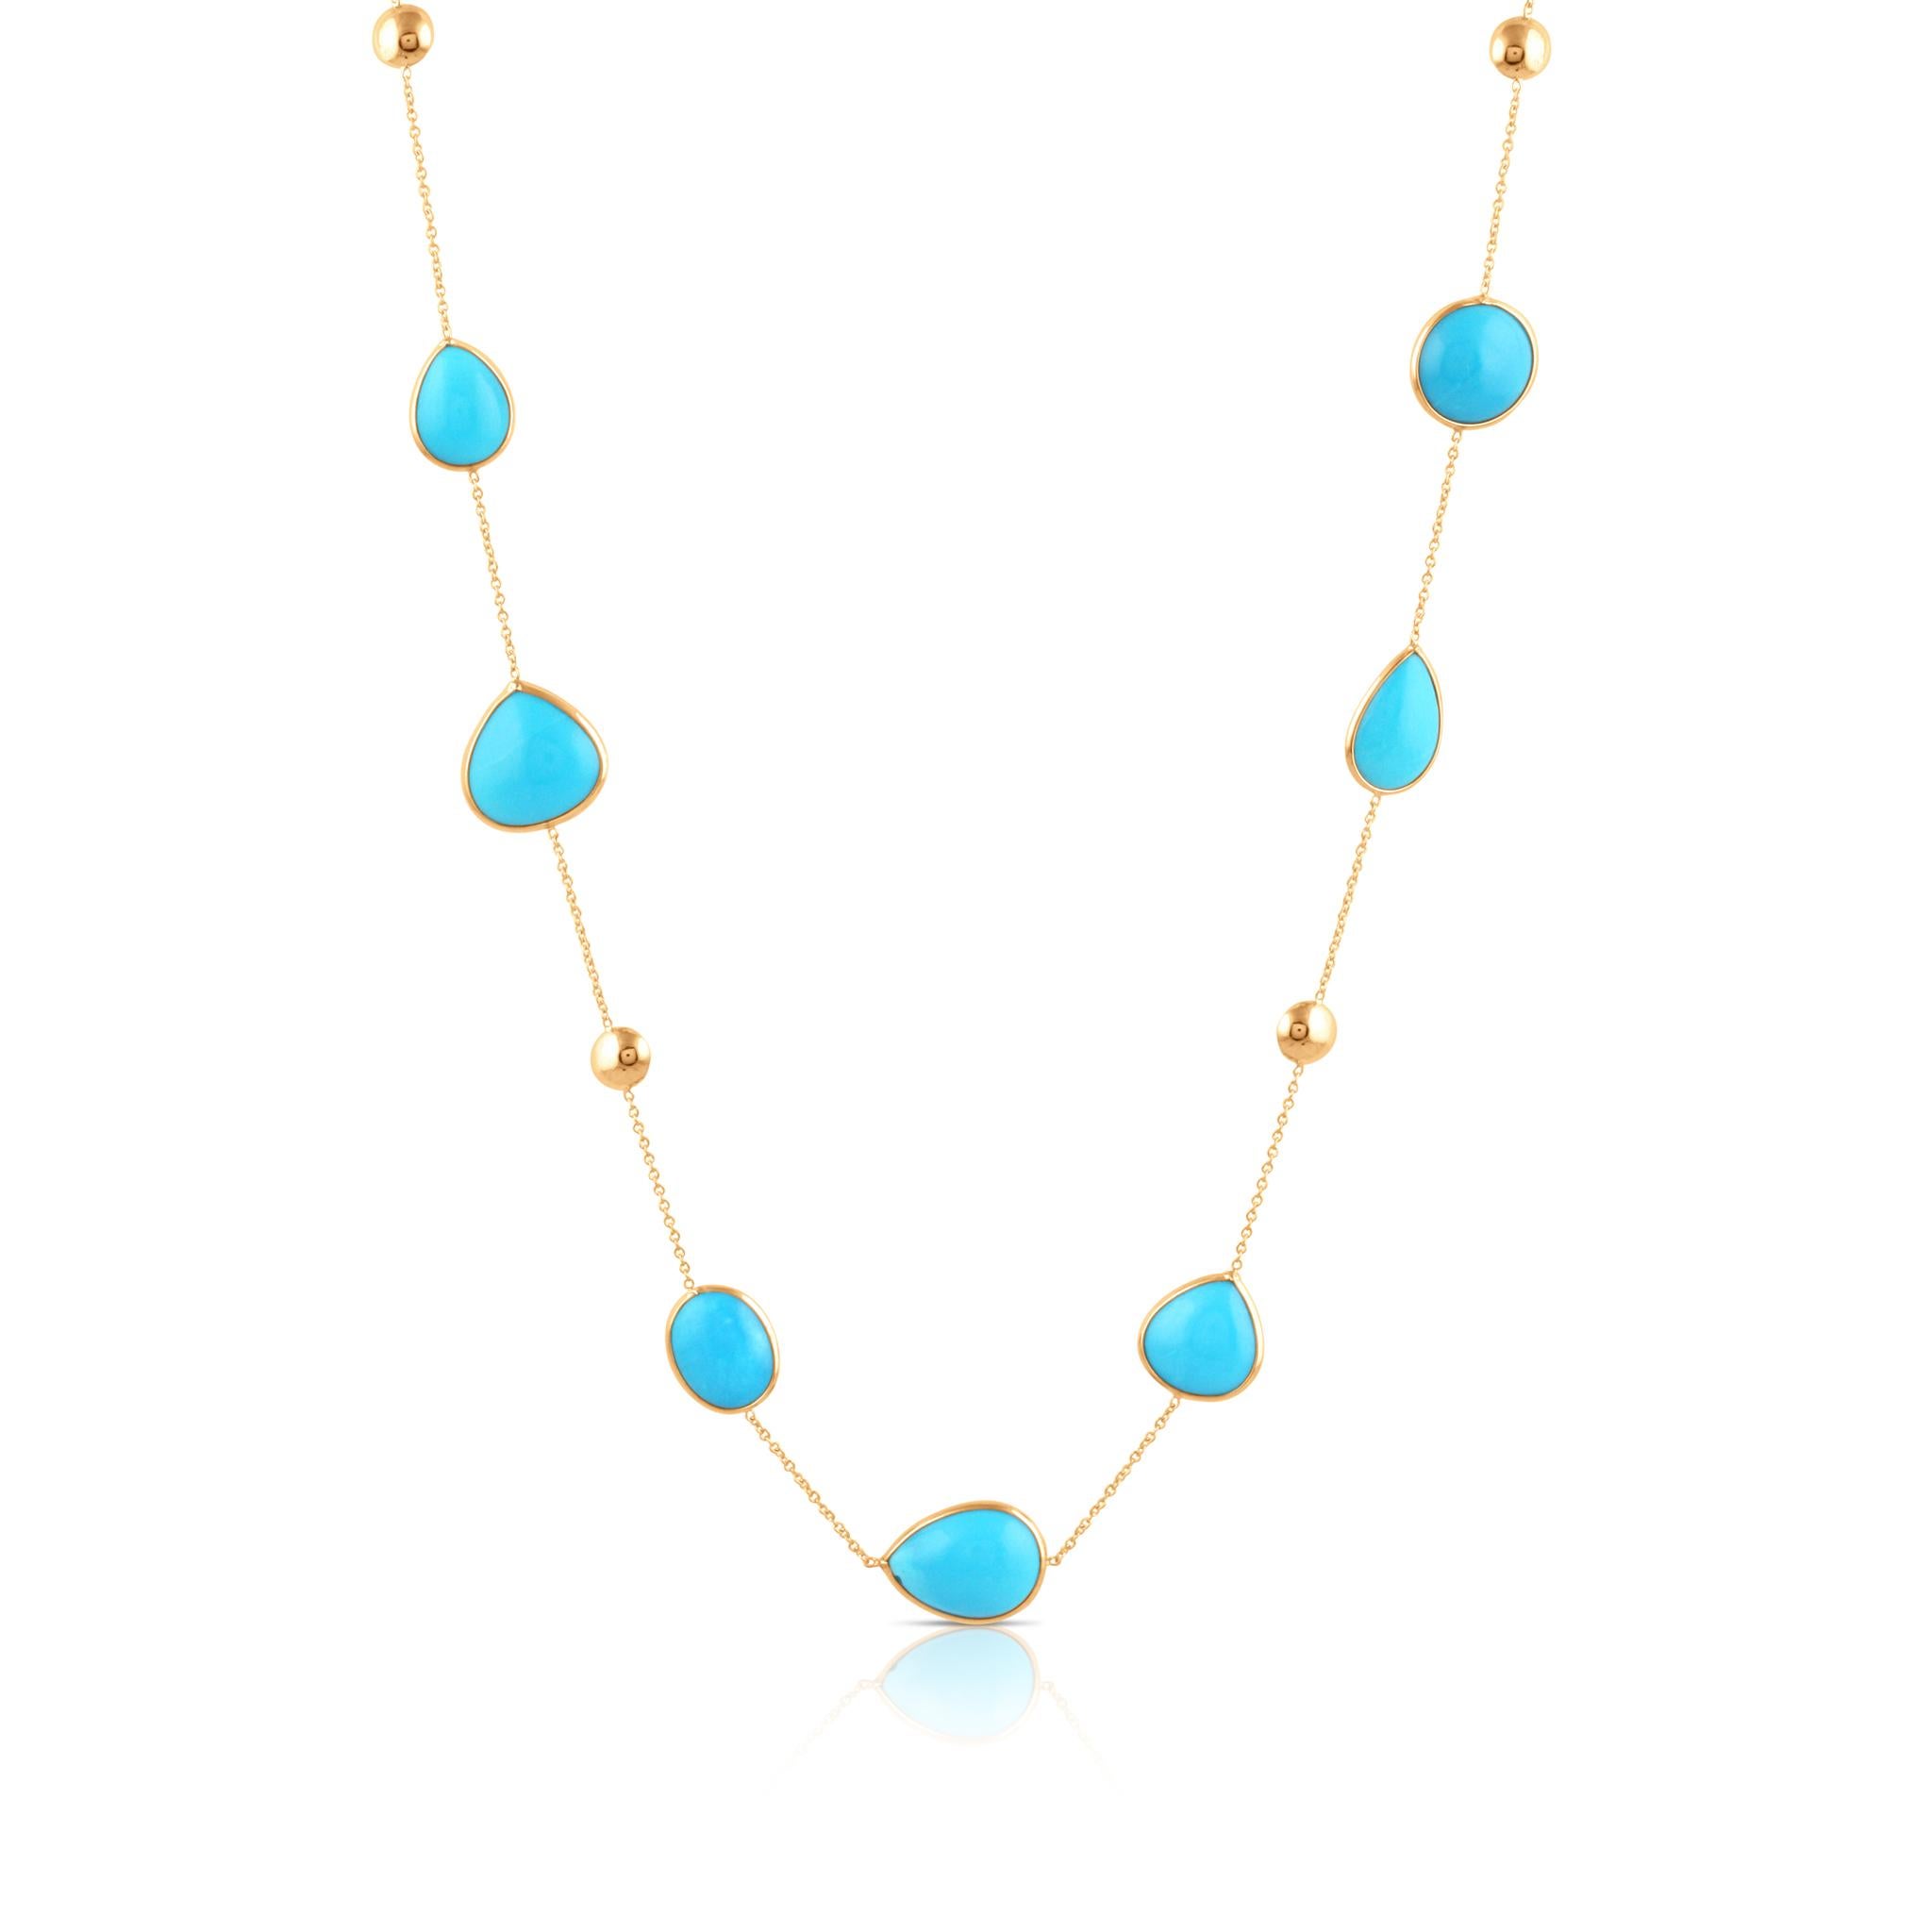 Tresor Beautiful Necklace features 38.37 carats of Turquoise. The Necklace are an ode to the luxurious yet classic beauty with sparkly gemstones and feminine hues. Their contemporary and modern design make them versatile in their use. The Necklace